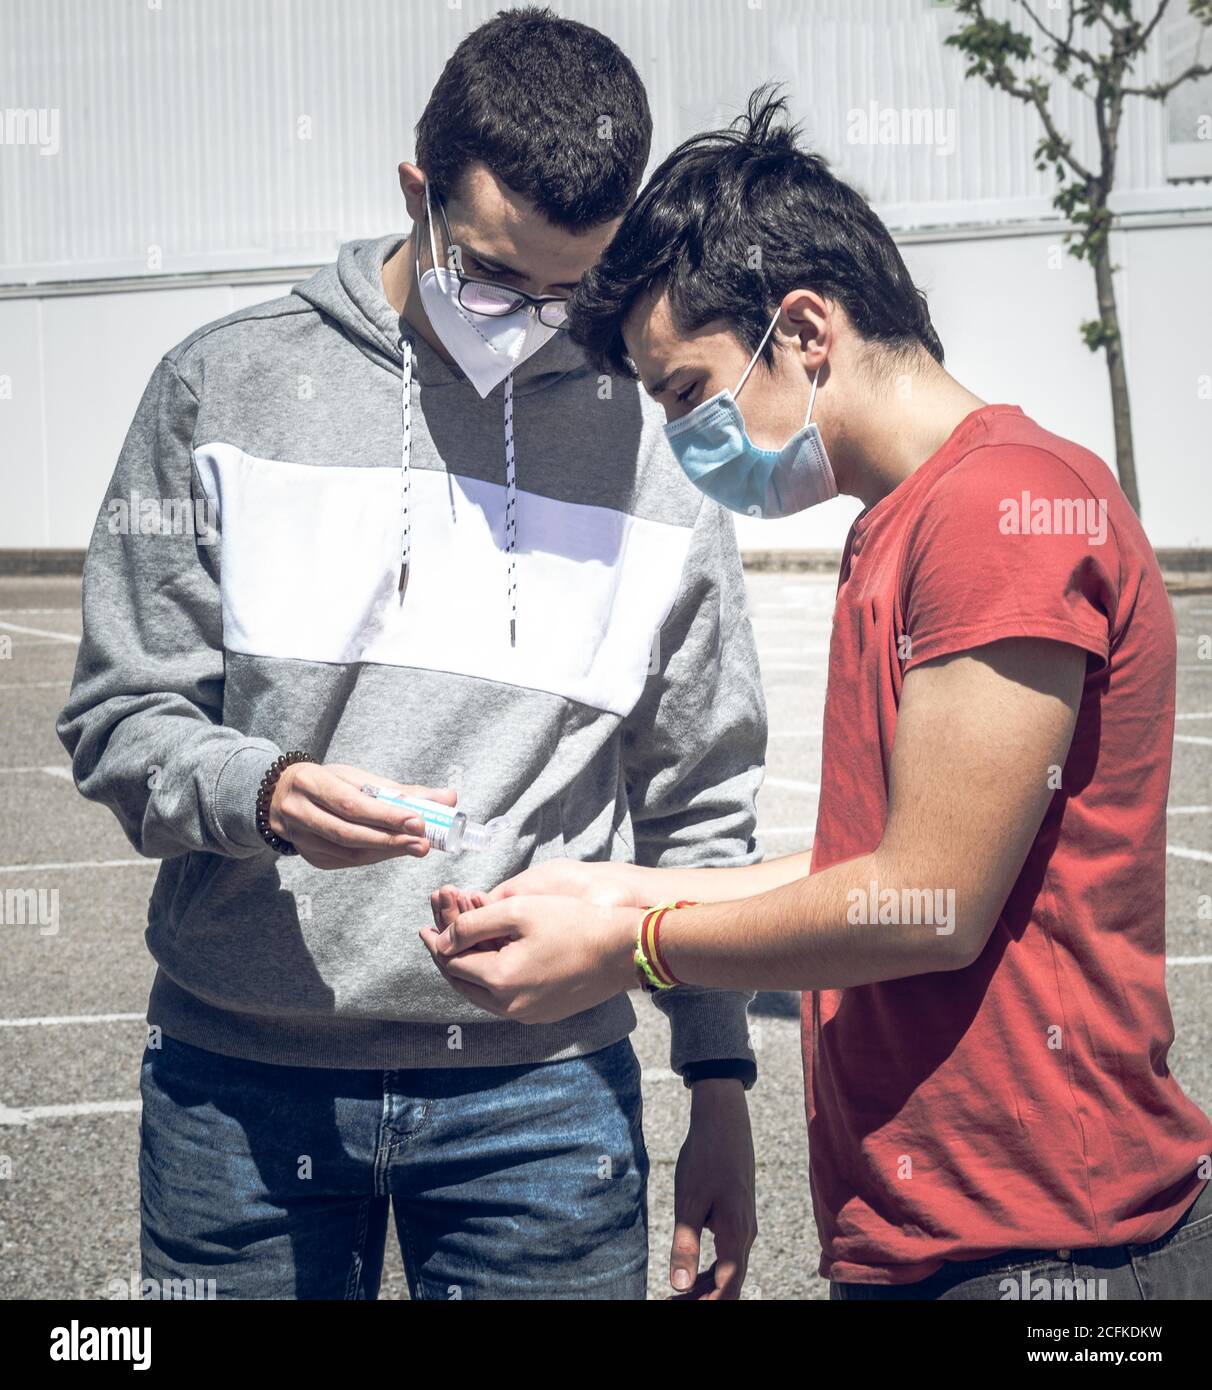 two young people sharing hydroalcoholic gel to disinfect themselves during the time of social distance to protect themselves from covid19 Stock Photo